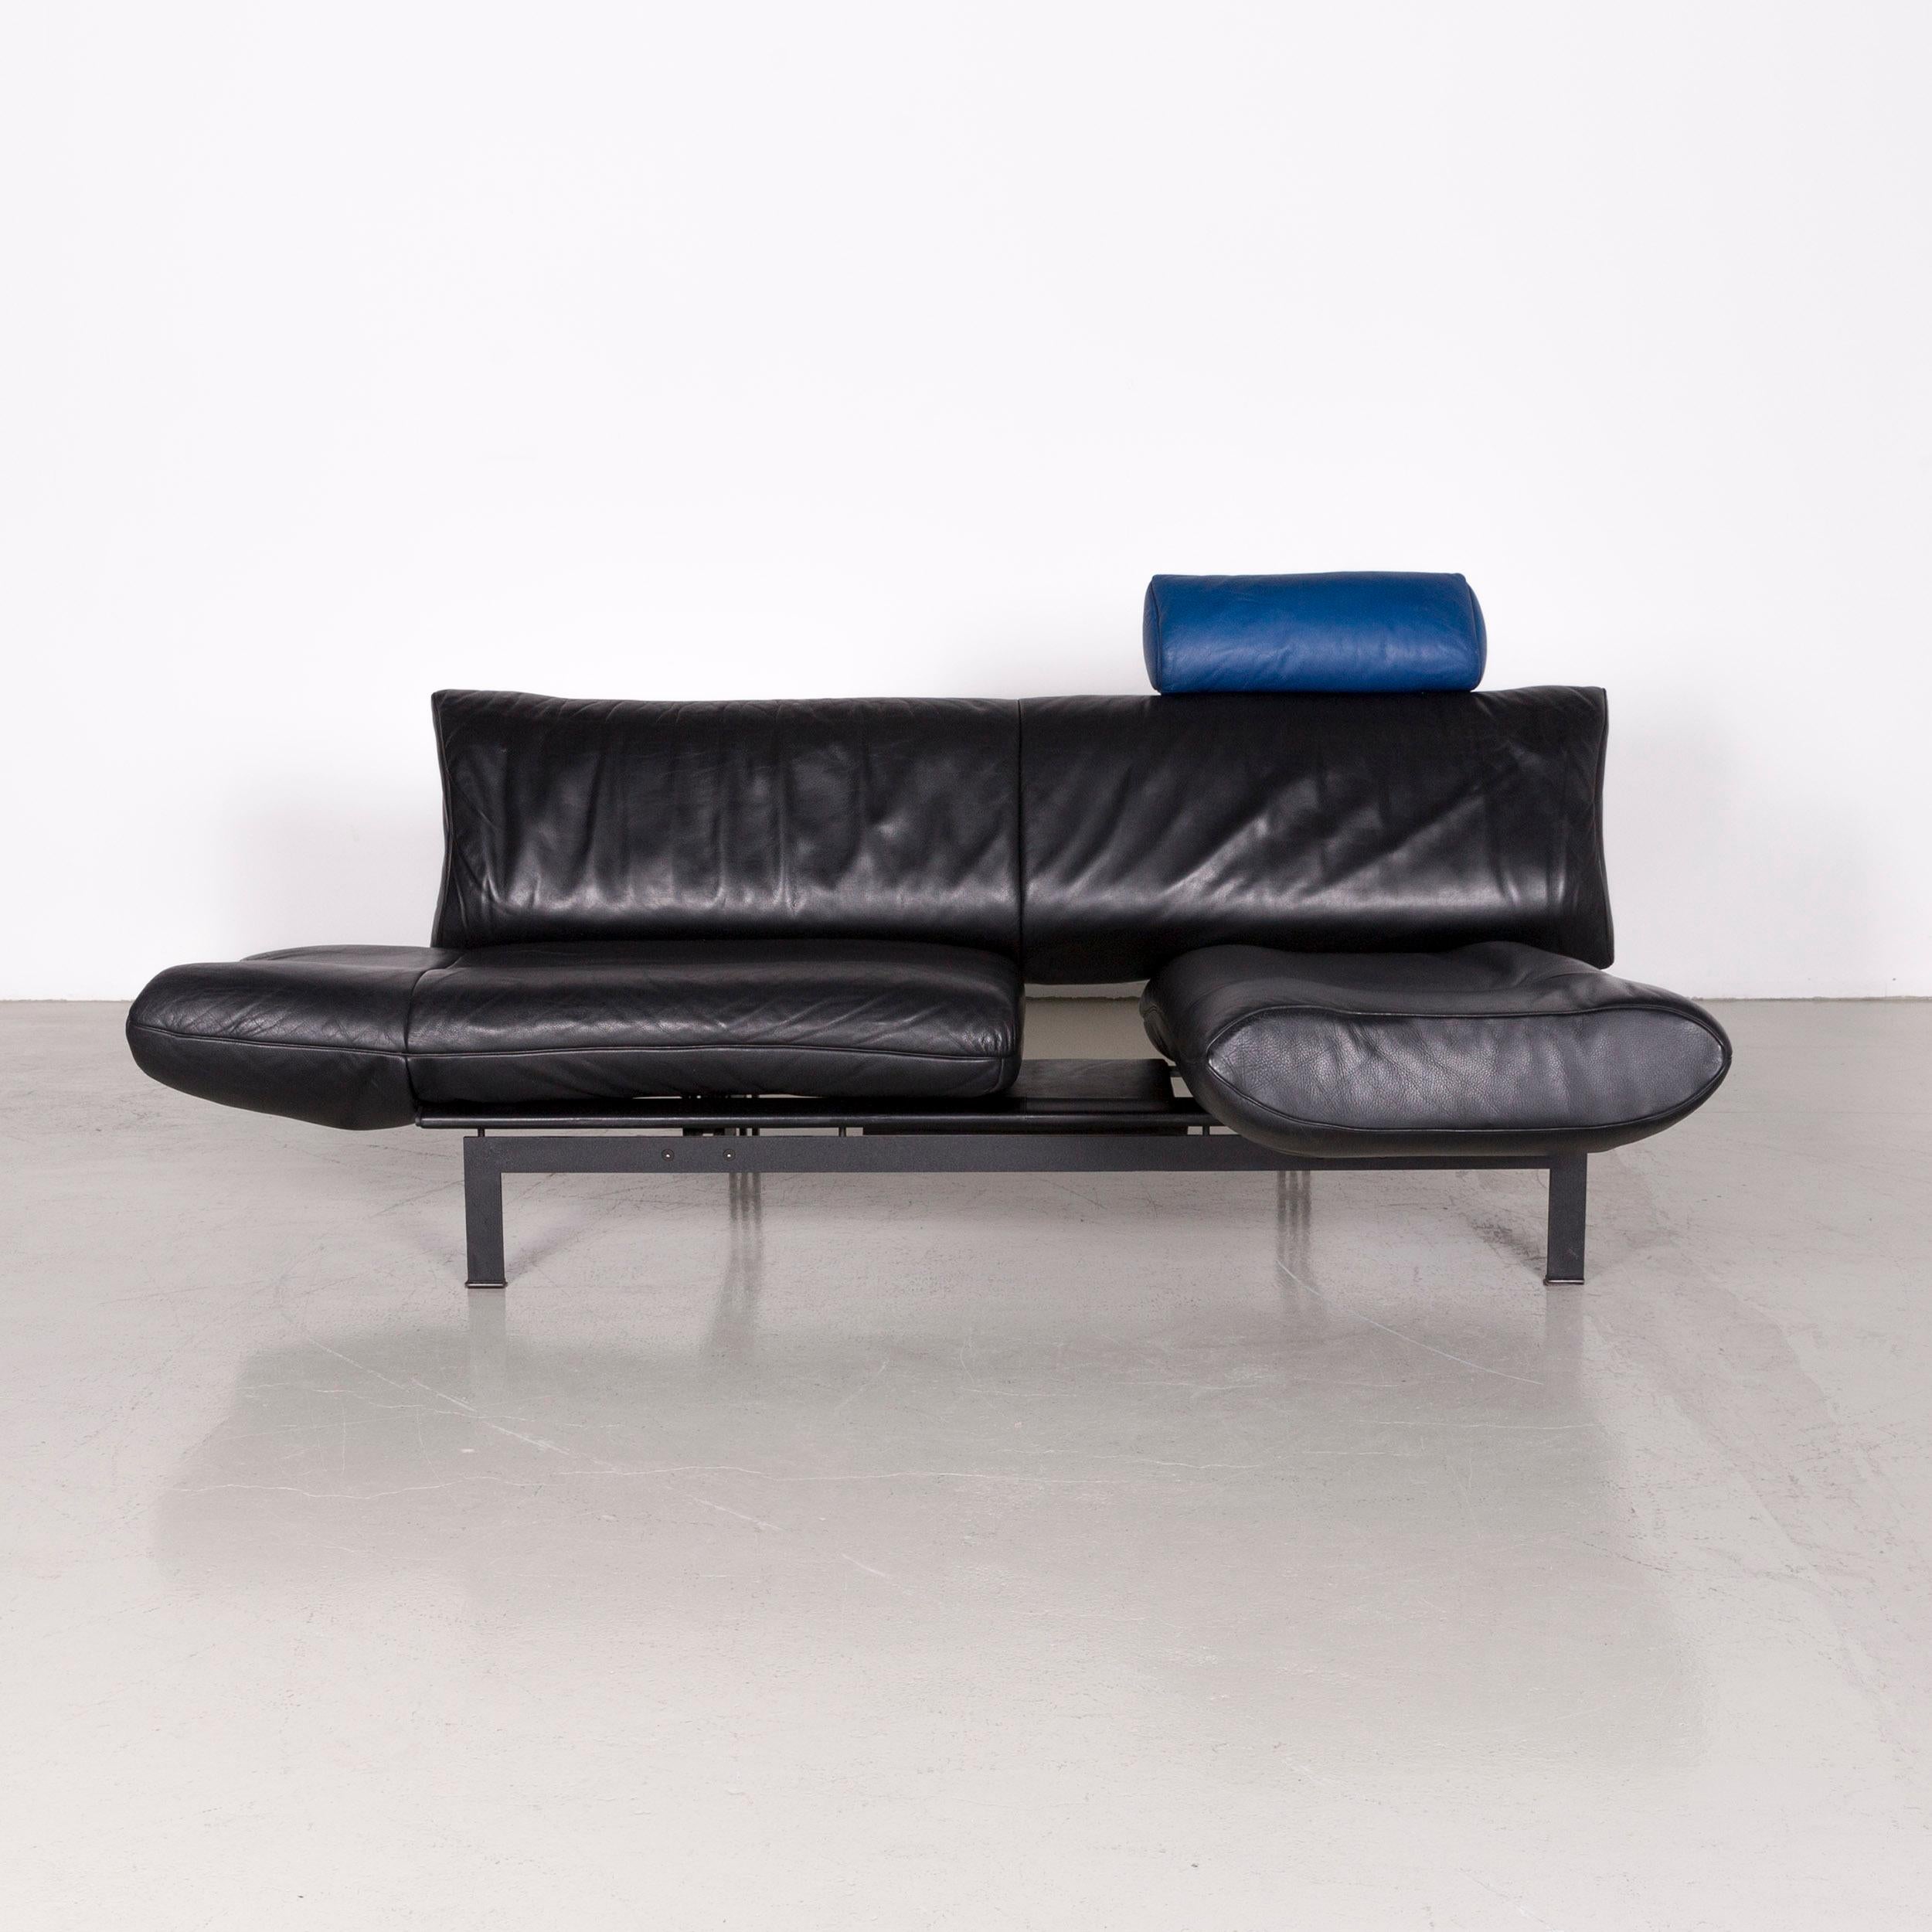 De Sede DS 140 Designer Leather Sofa Black Three-Seat Function Modern In Good Condition For Sale In Cologne, DE